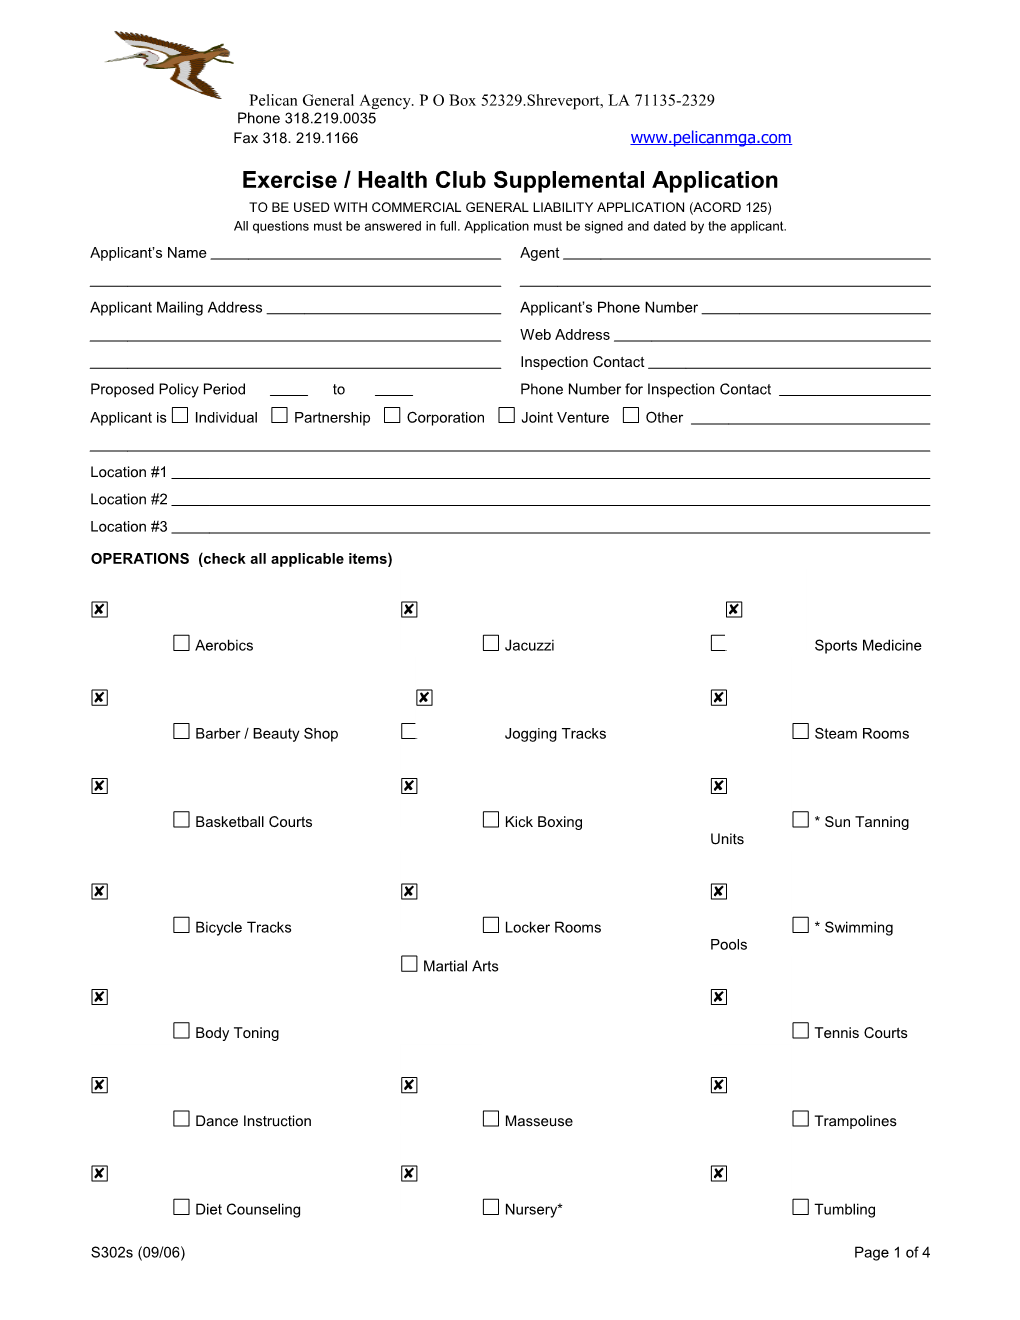 Exercise / Health Club Application